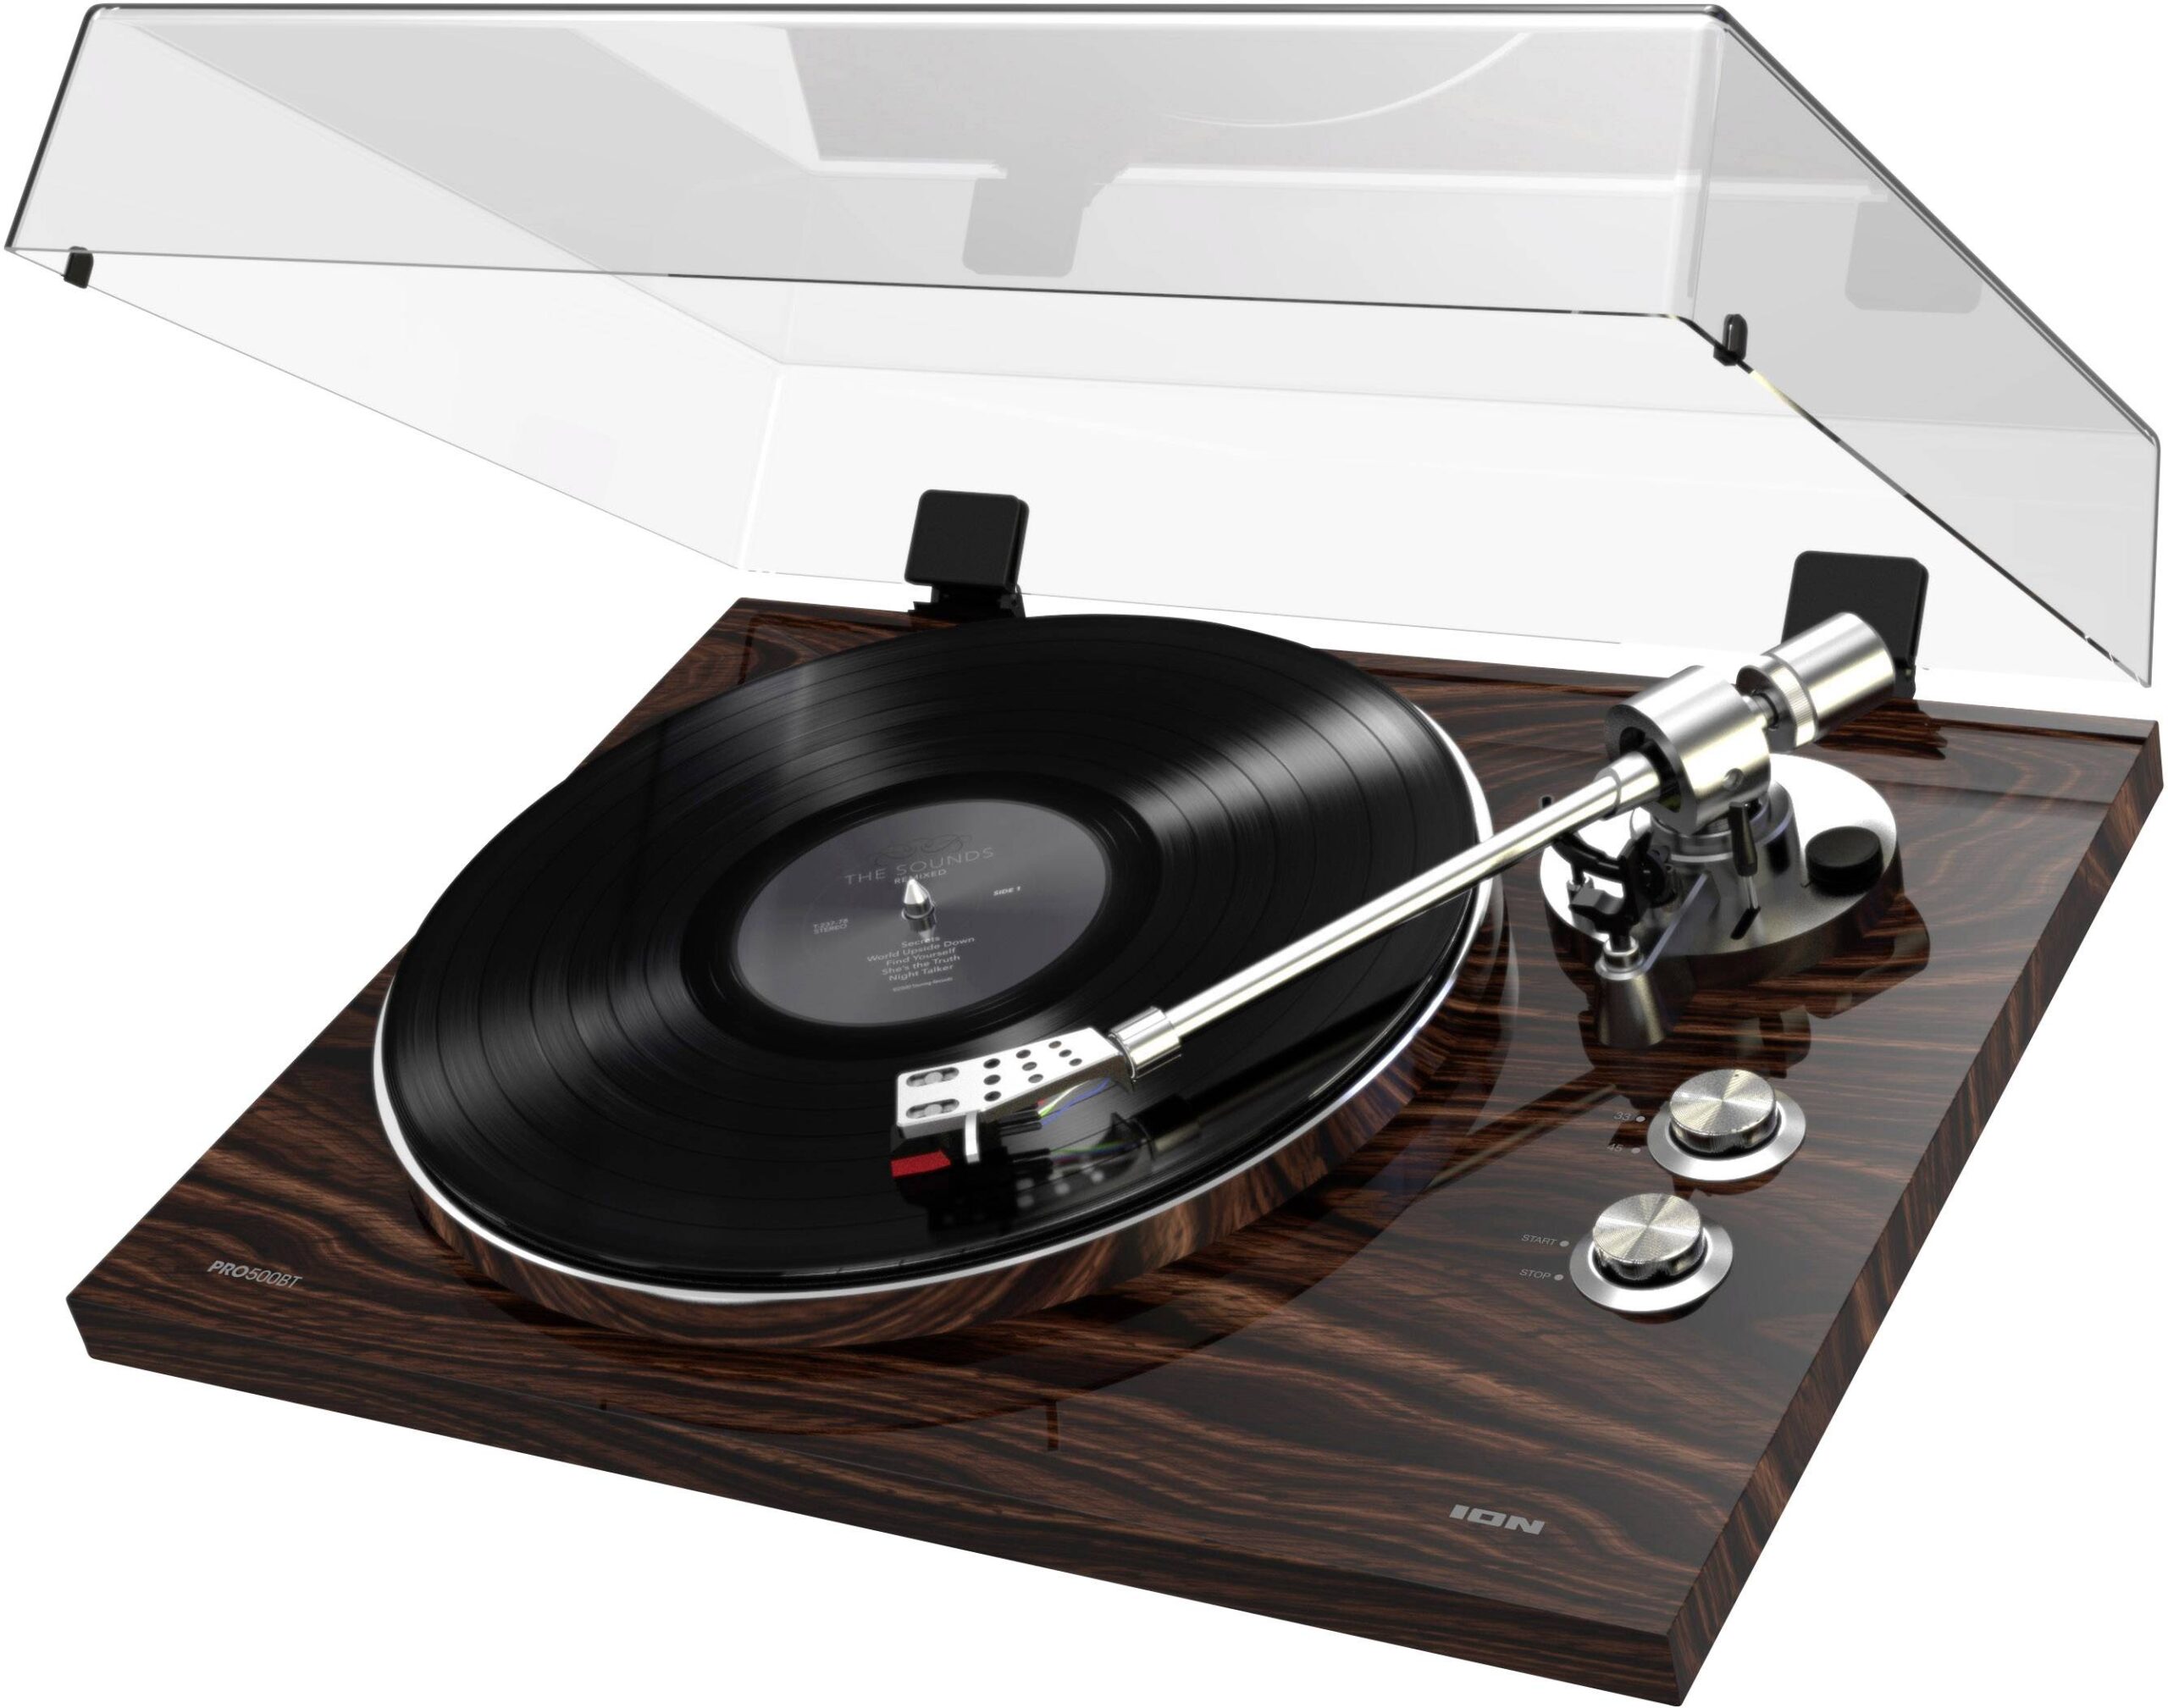 Top 10 Best Turntables With Builtin Preamp On The Market